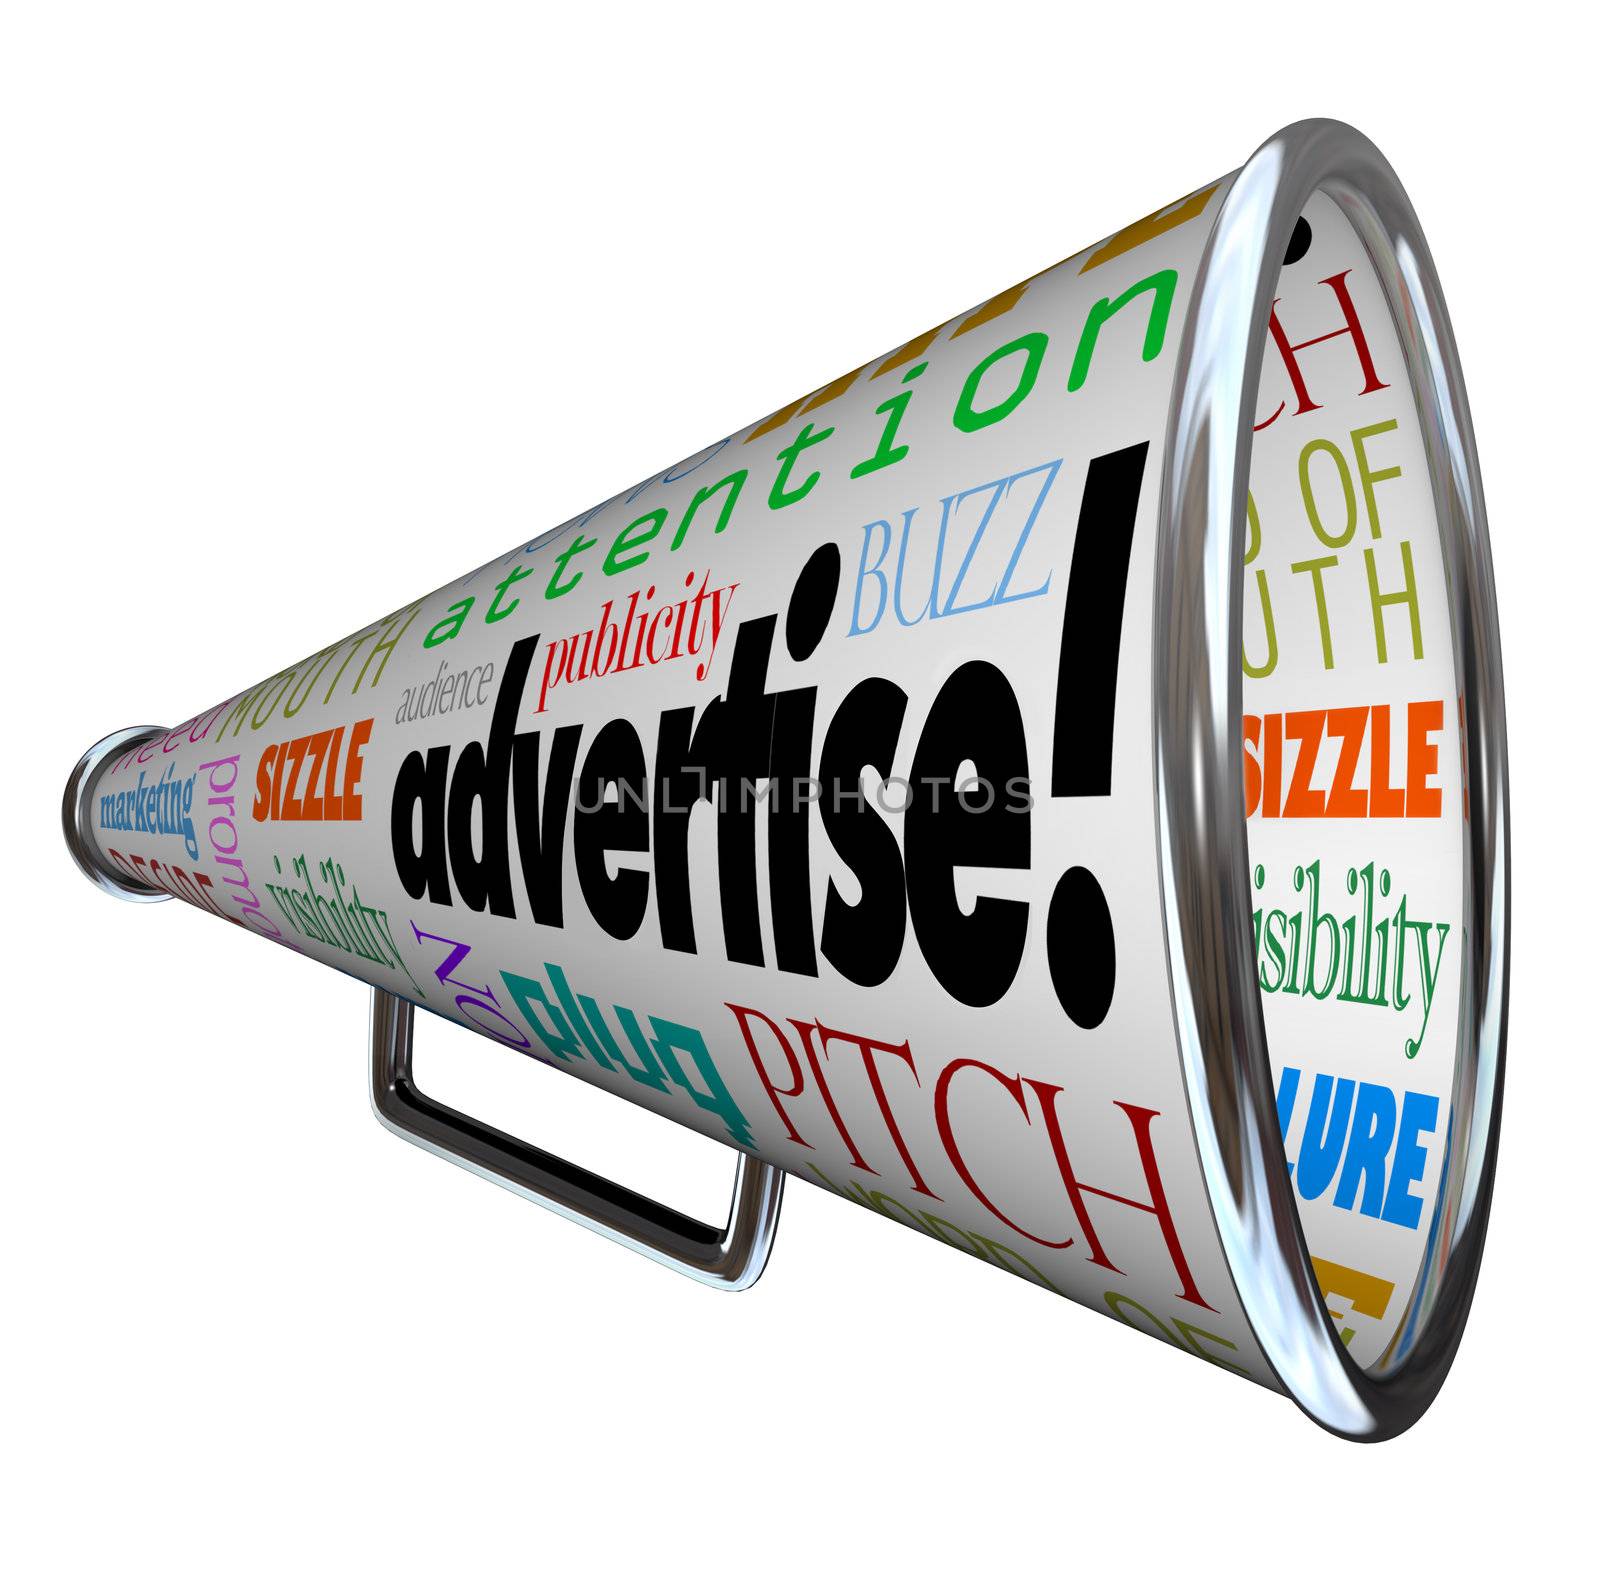 A bullhorn megaphone covered with words describing advertising such as advertise, promotion, public relations, marketing, attention, audience, plug, buzz and many more